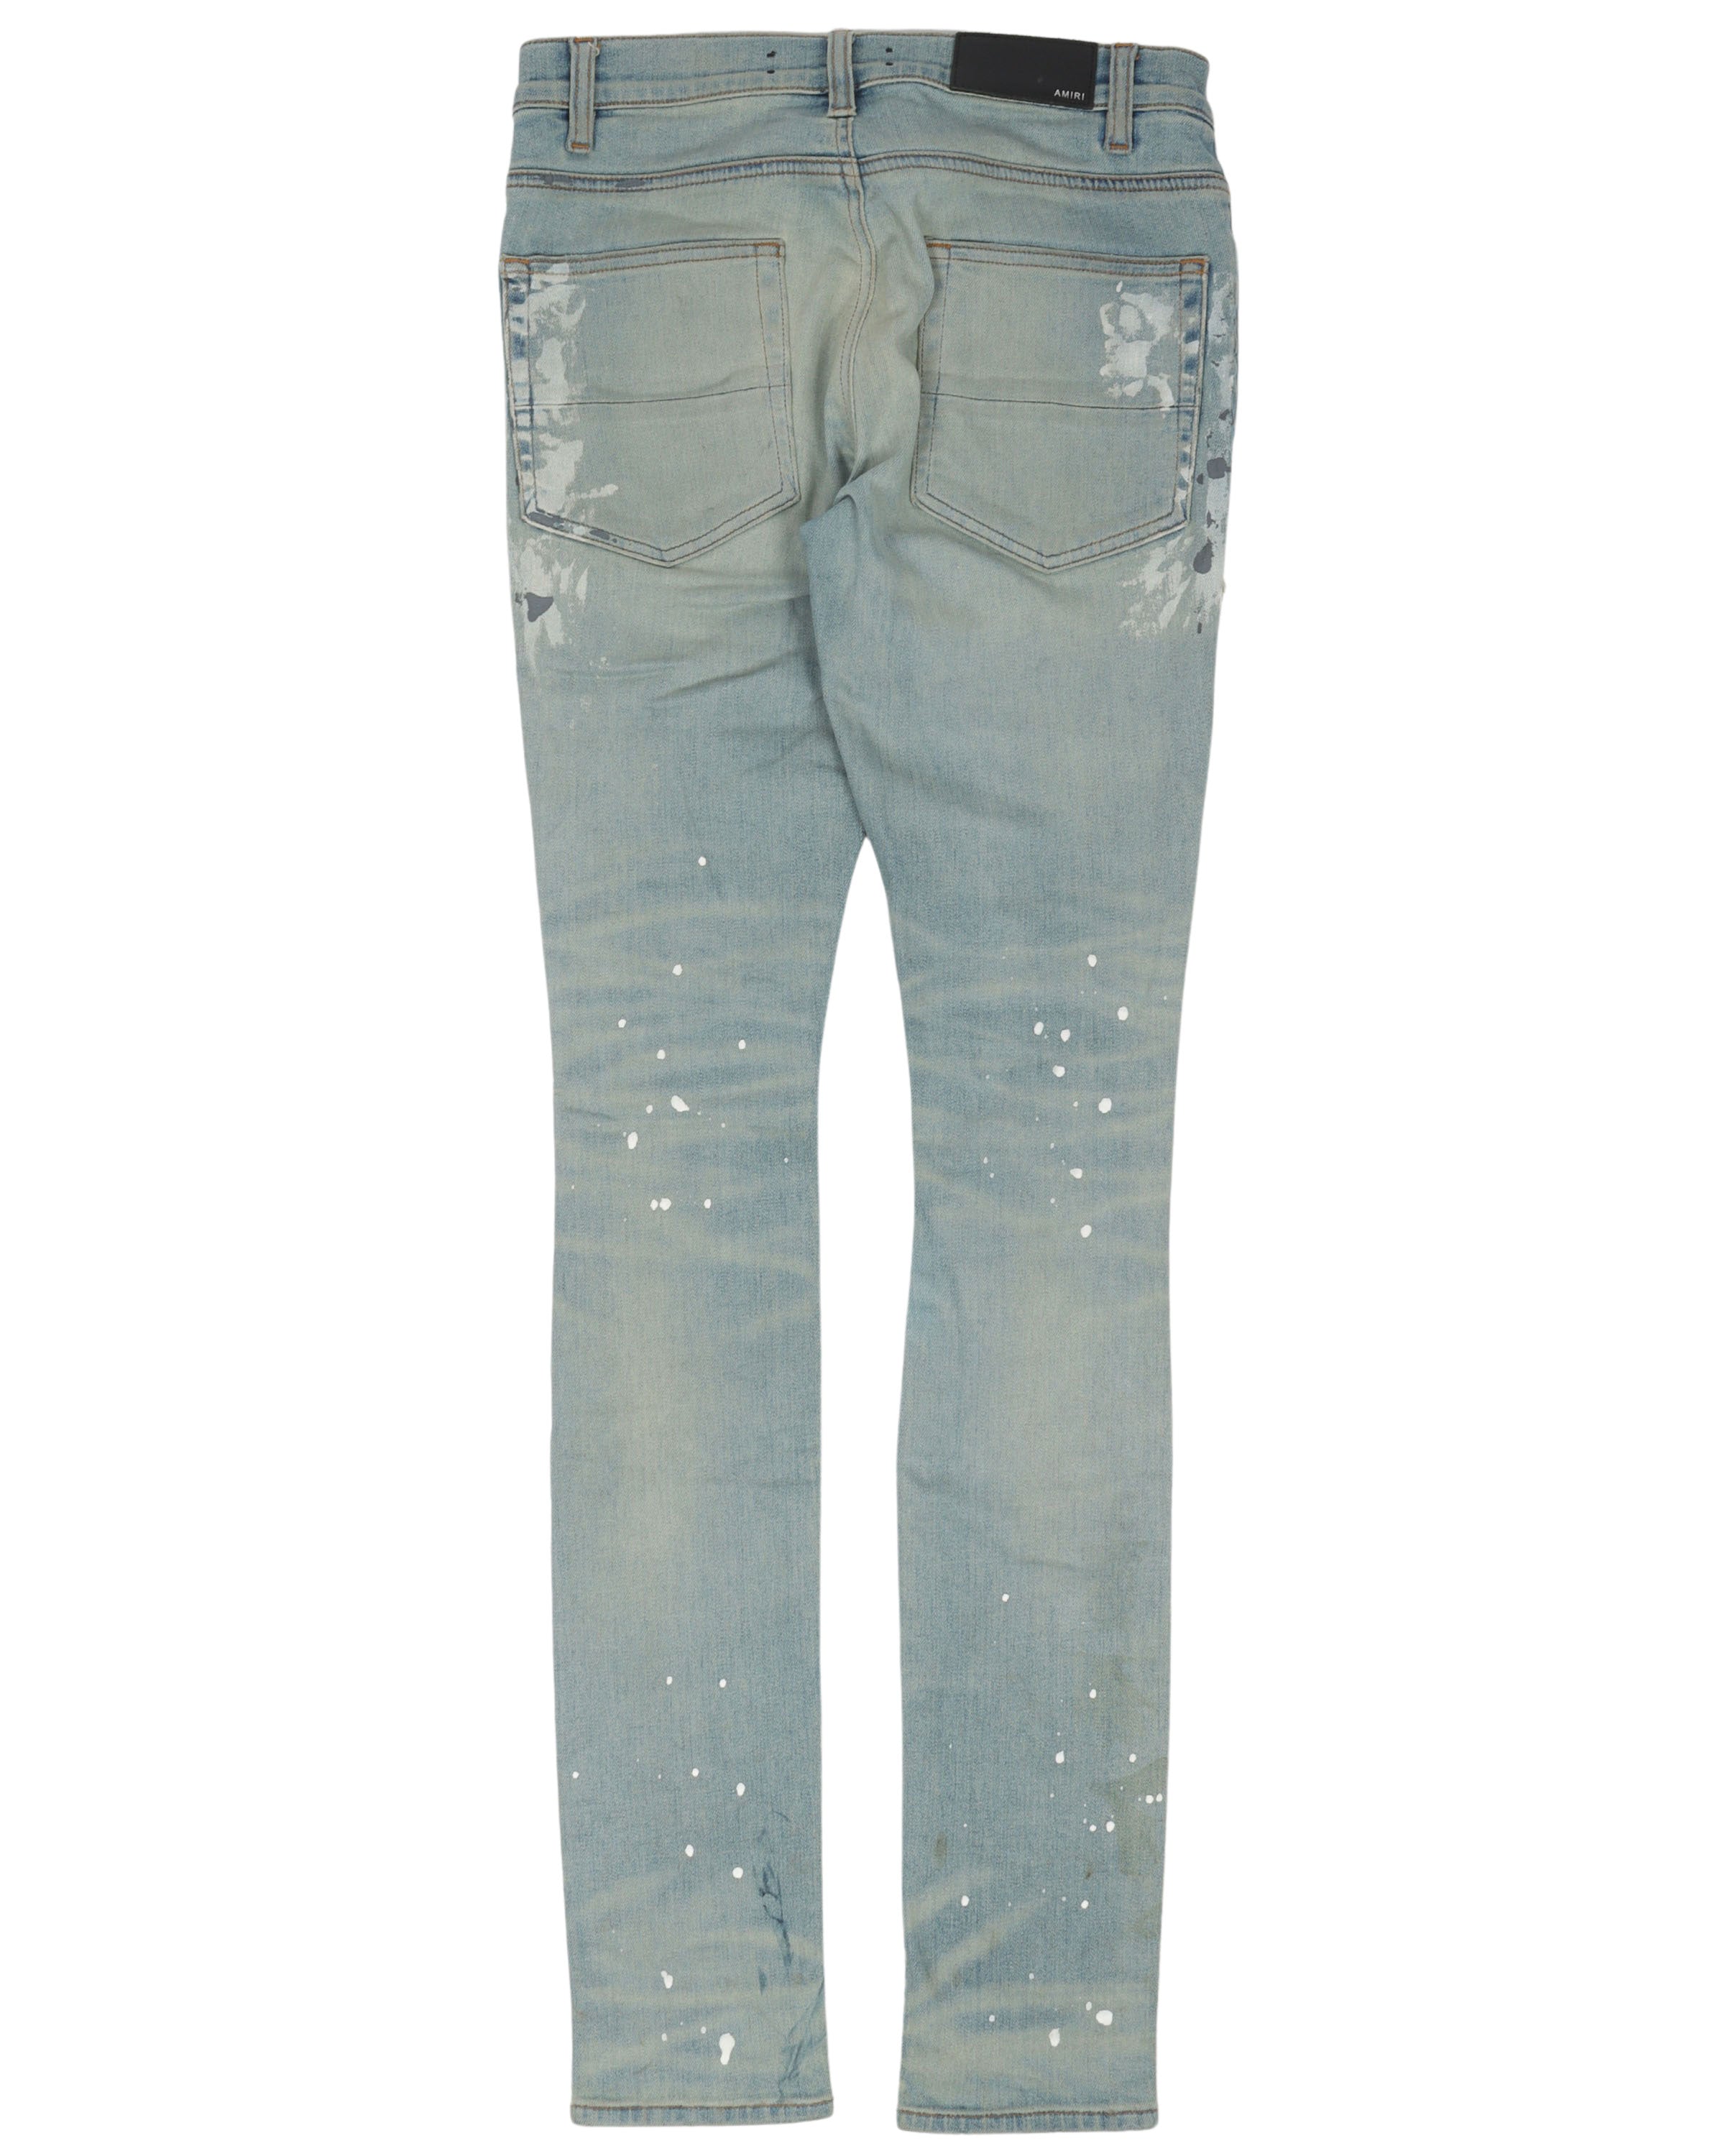 Paint Distressed Jeans